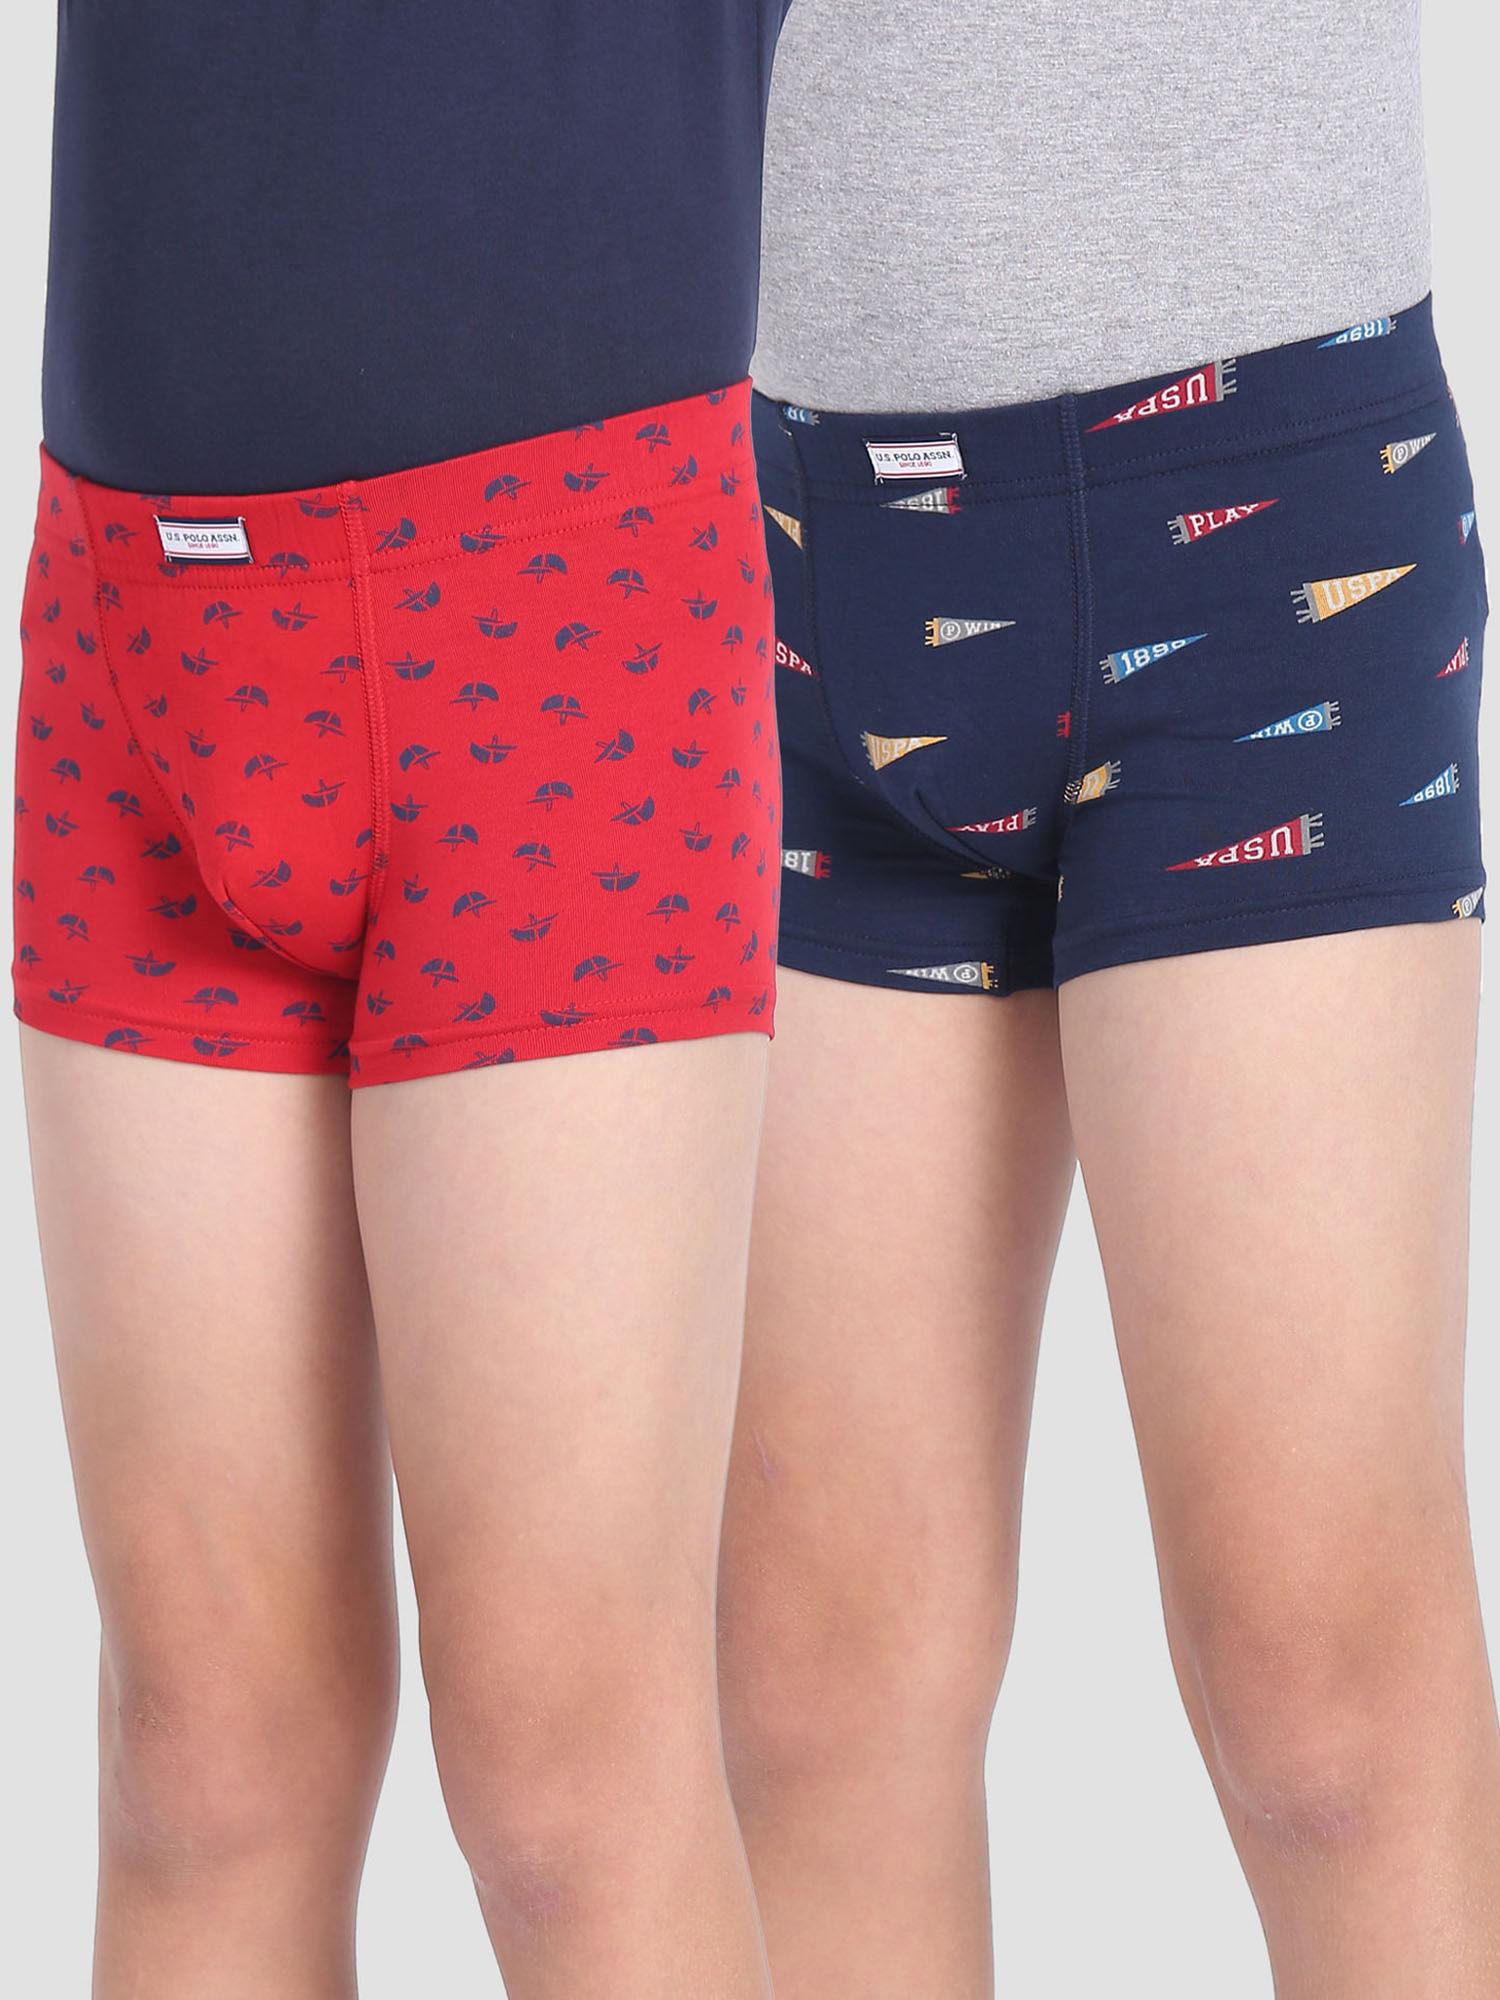 Mid Rise Cotton Spandex Okt01 Trunks (Pack of 2)